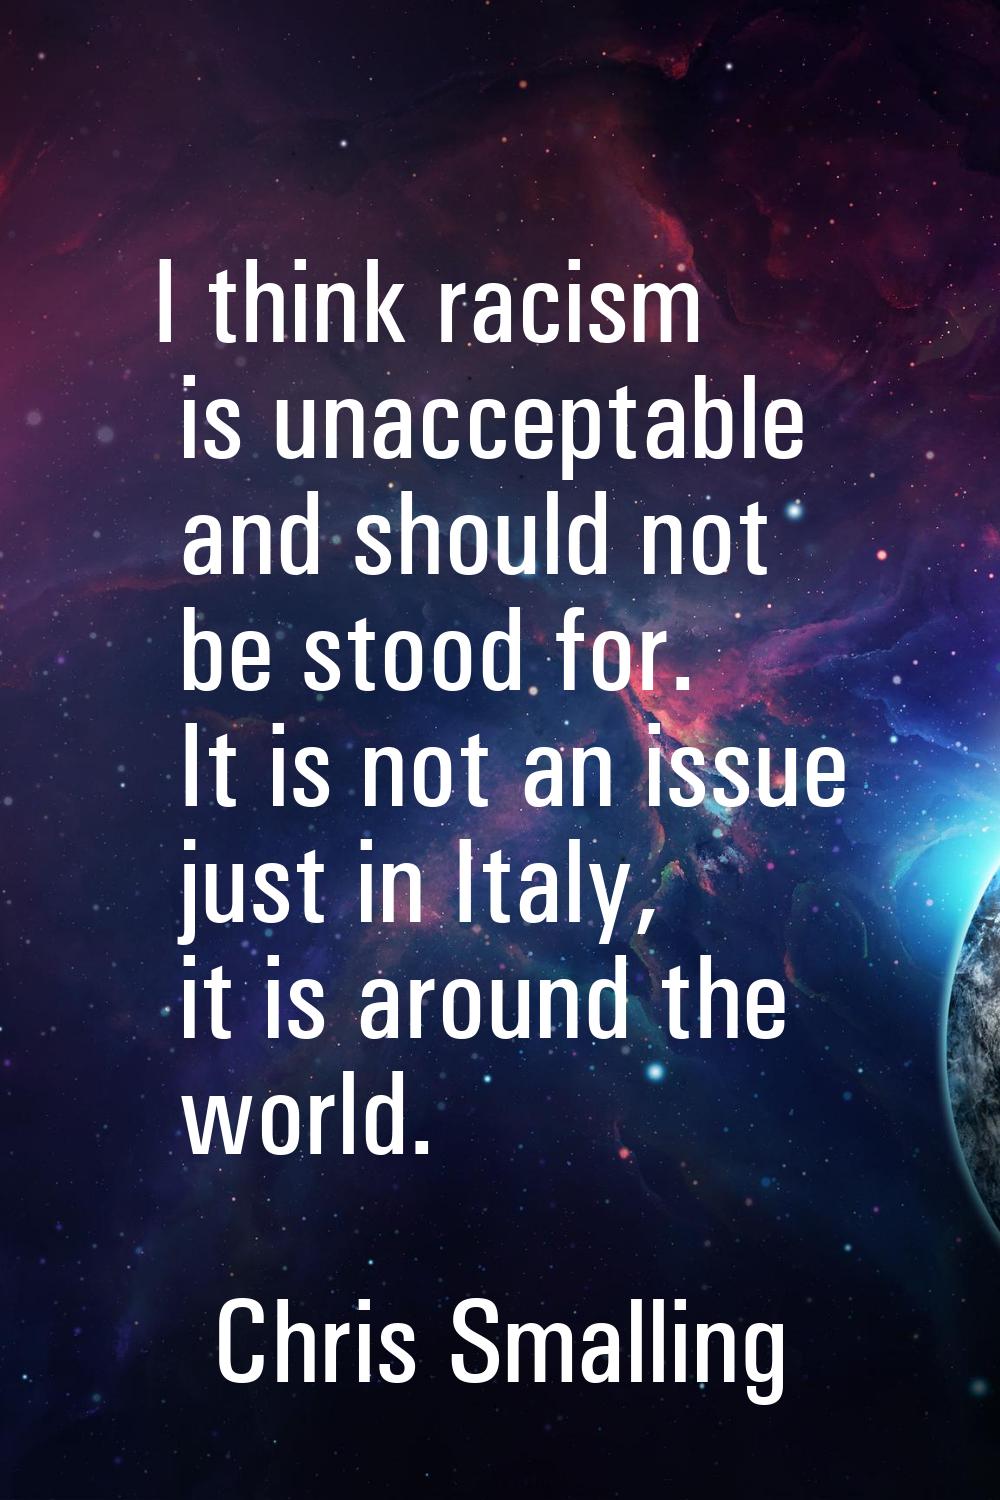 I think racism is unacceptable and should not be stood for. It is not an issue just in Italy, it is